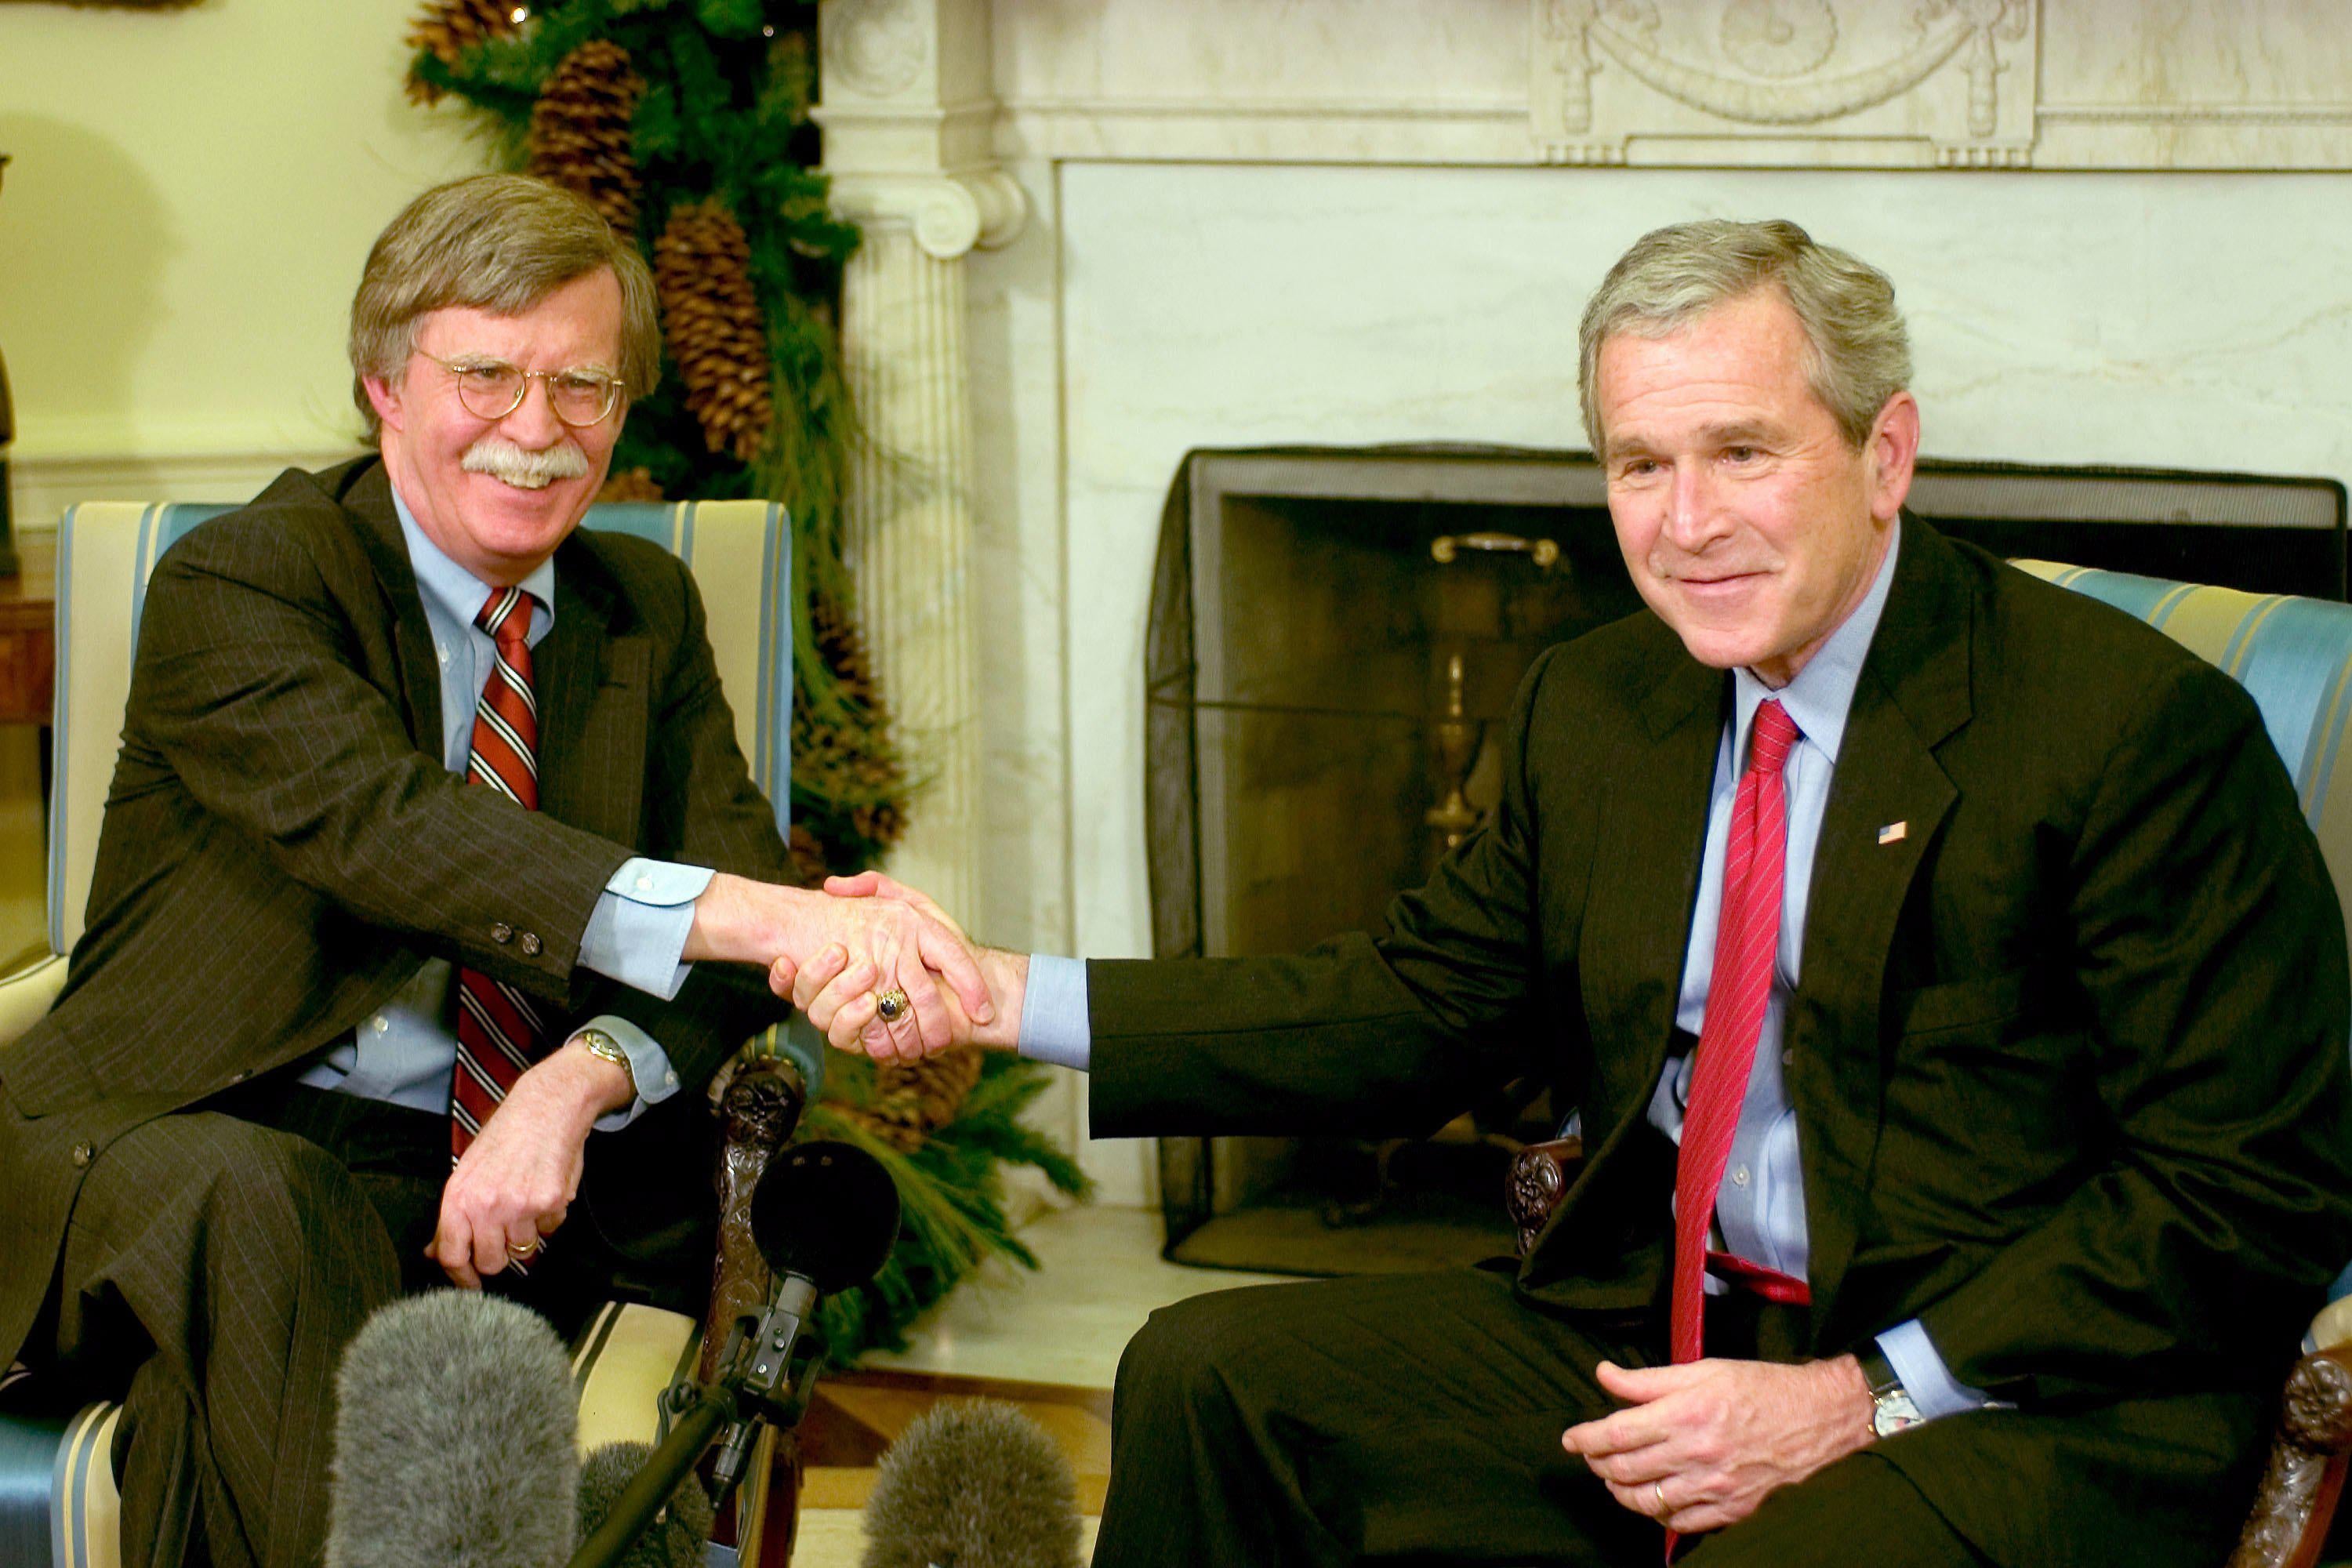 WASHINGTON - DECEMBER 4:  (AFP OUT) US President George W. Bush (R) and Ambassador to the UN John Bolton (L) meet in the Oval Office of the White House December 4, 2006 in Washington, DC. Bush accepted Bolton's resignation as Ambassador to the United Nations when his term is up in January 2007.  (Photo by Ron Sachs-Pool/Getty Images)